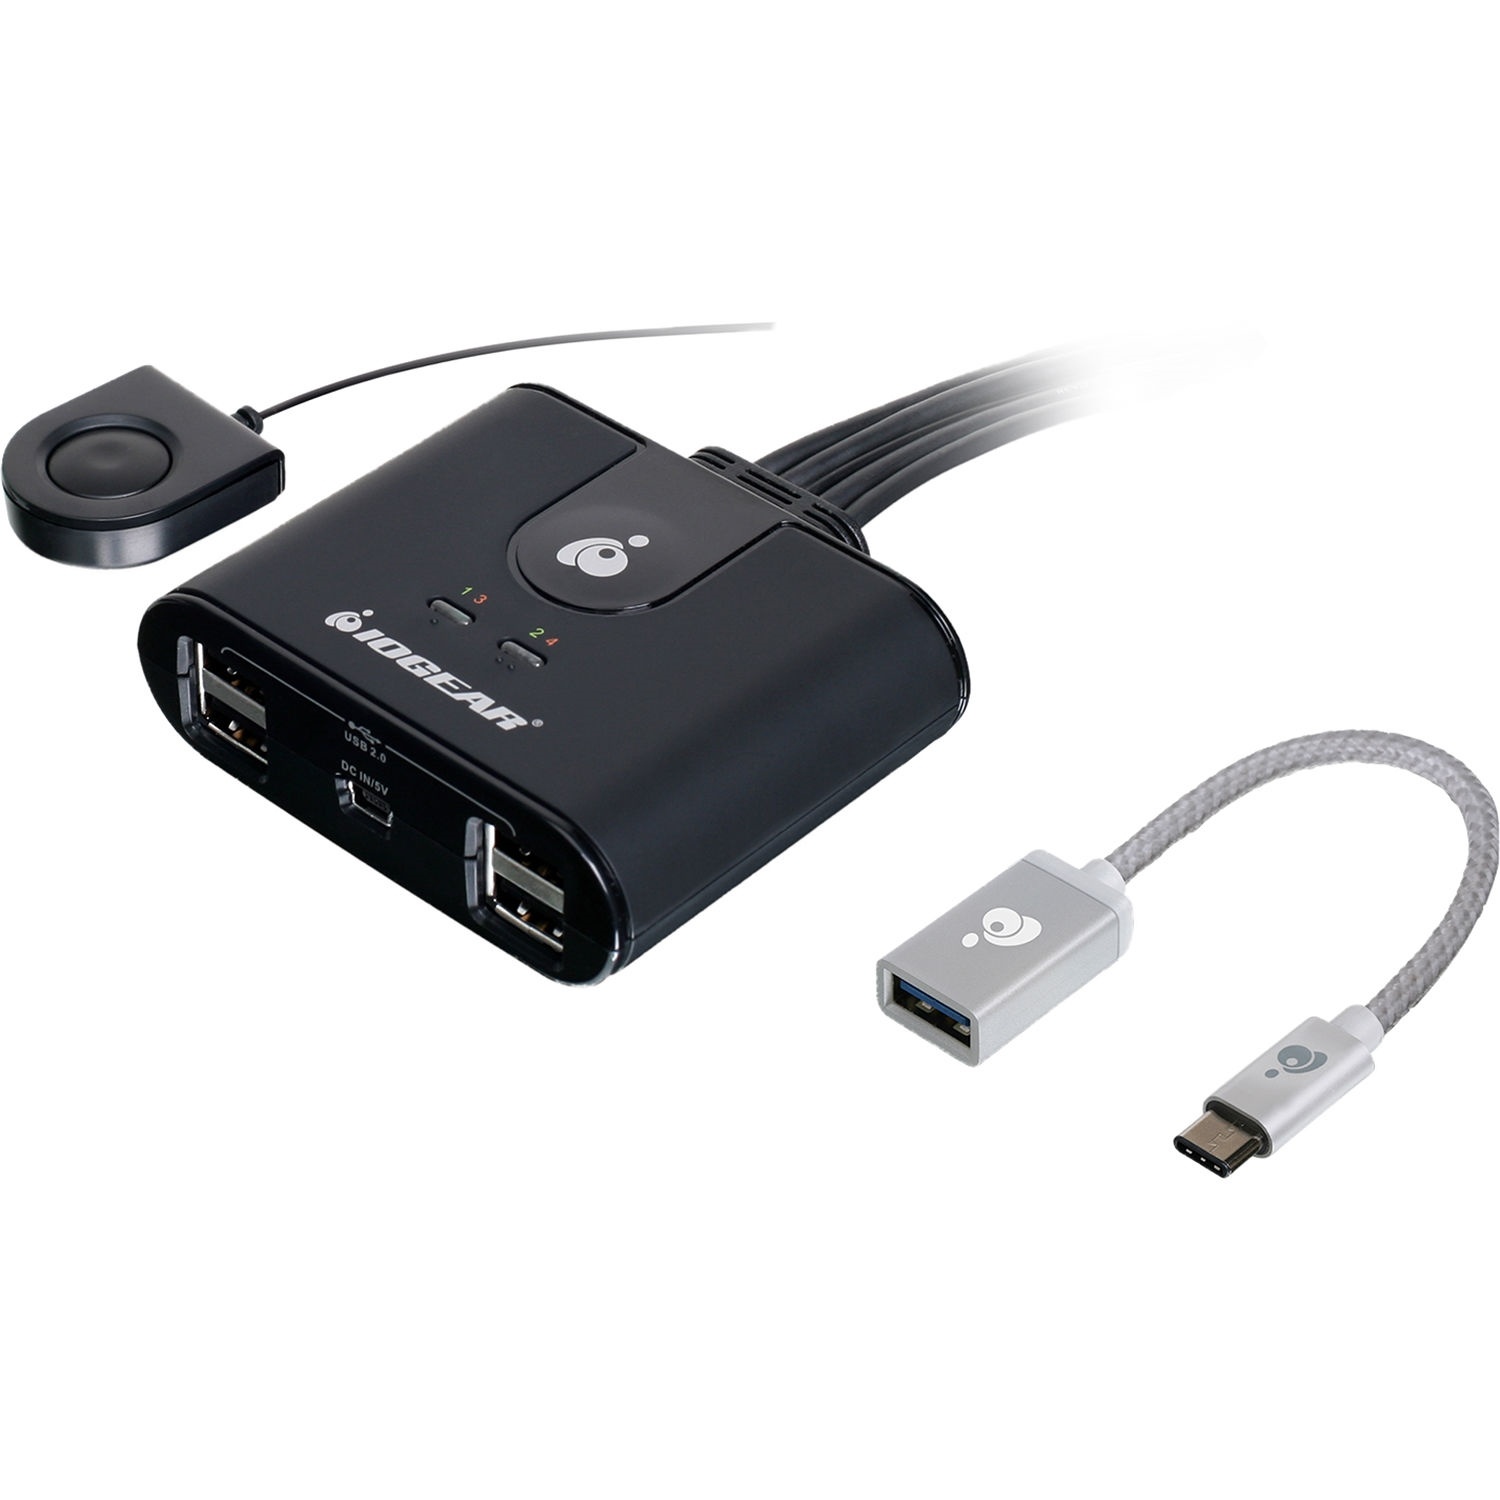 IOGEAR 4x4 USB 2.0 Sharing Switch with USB Type-C Adapter